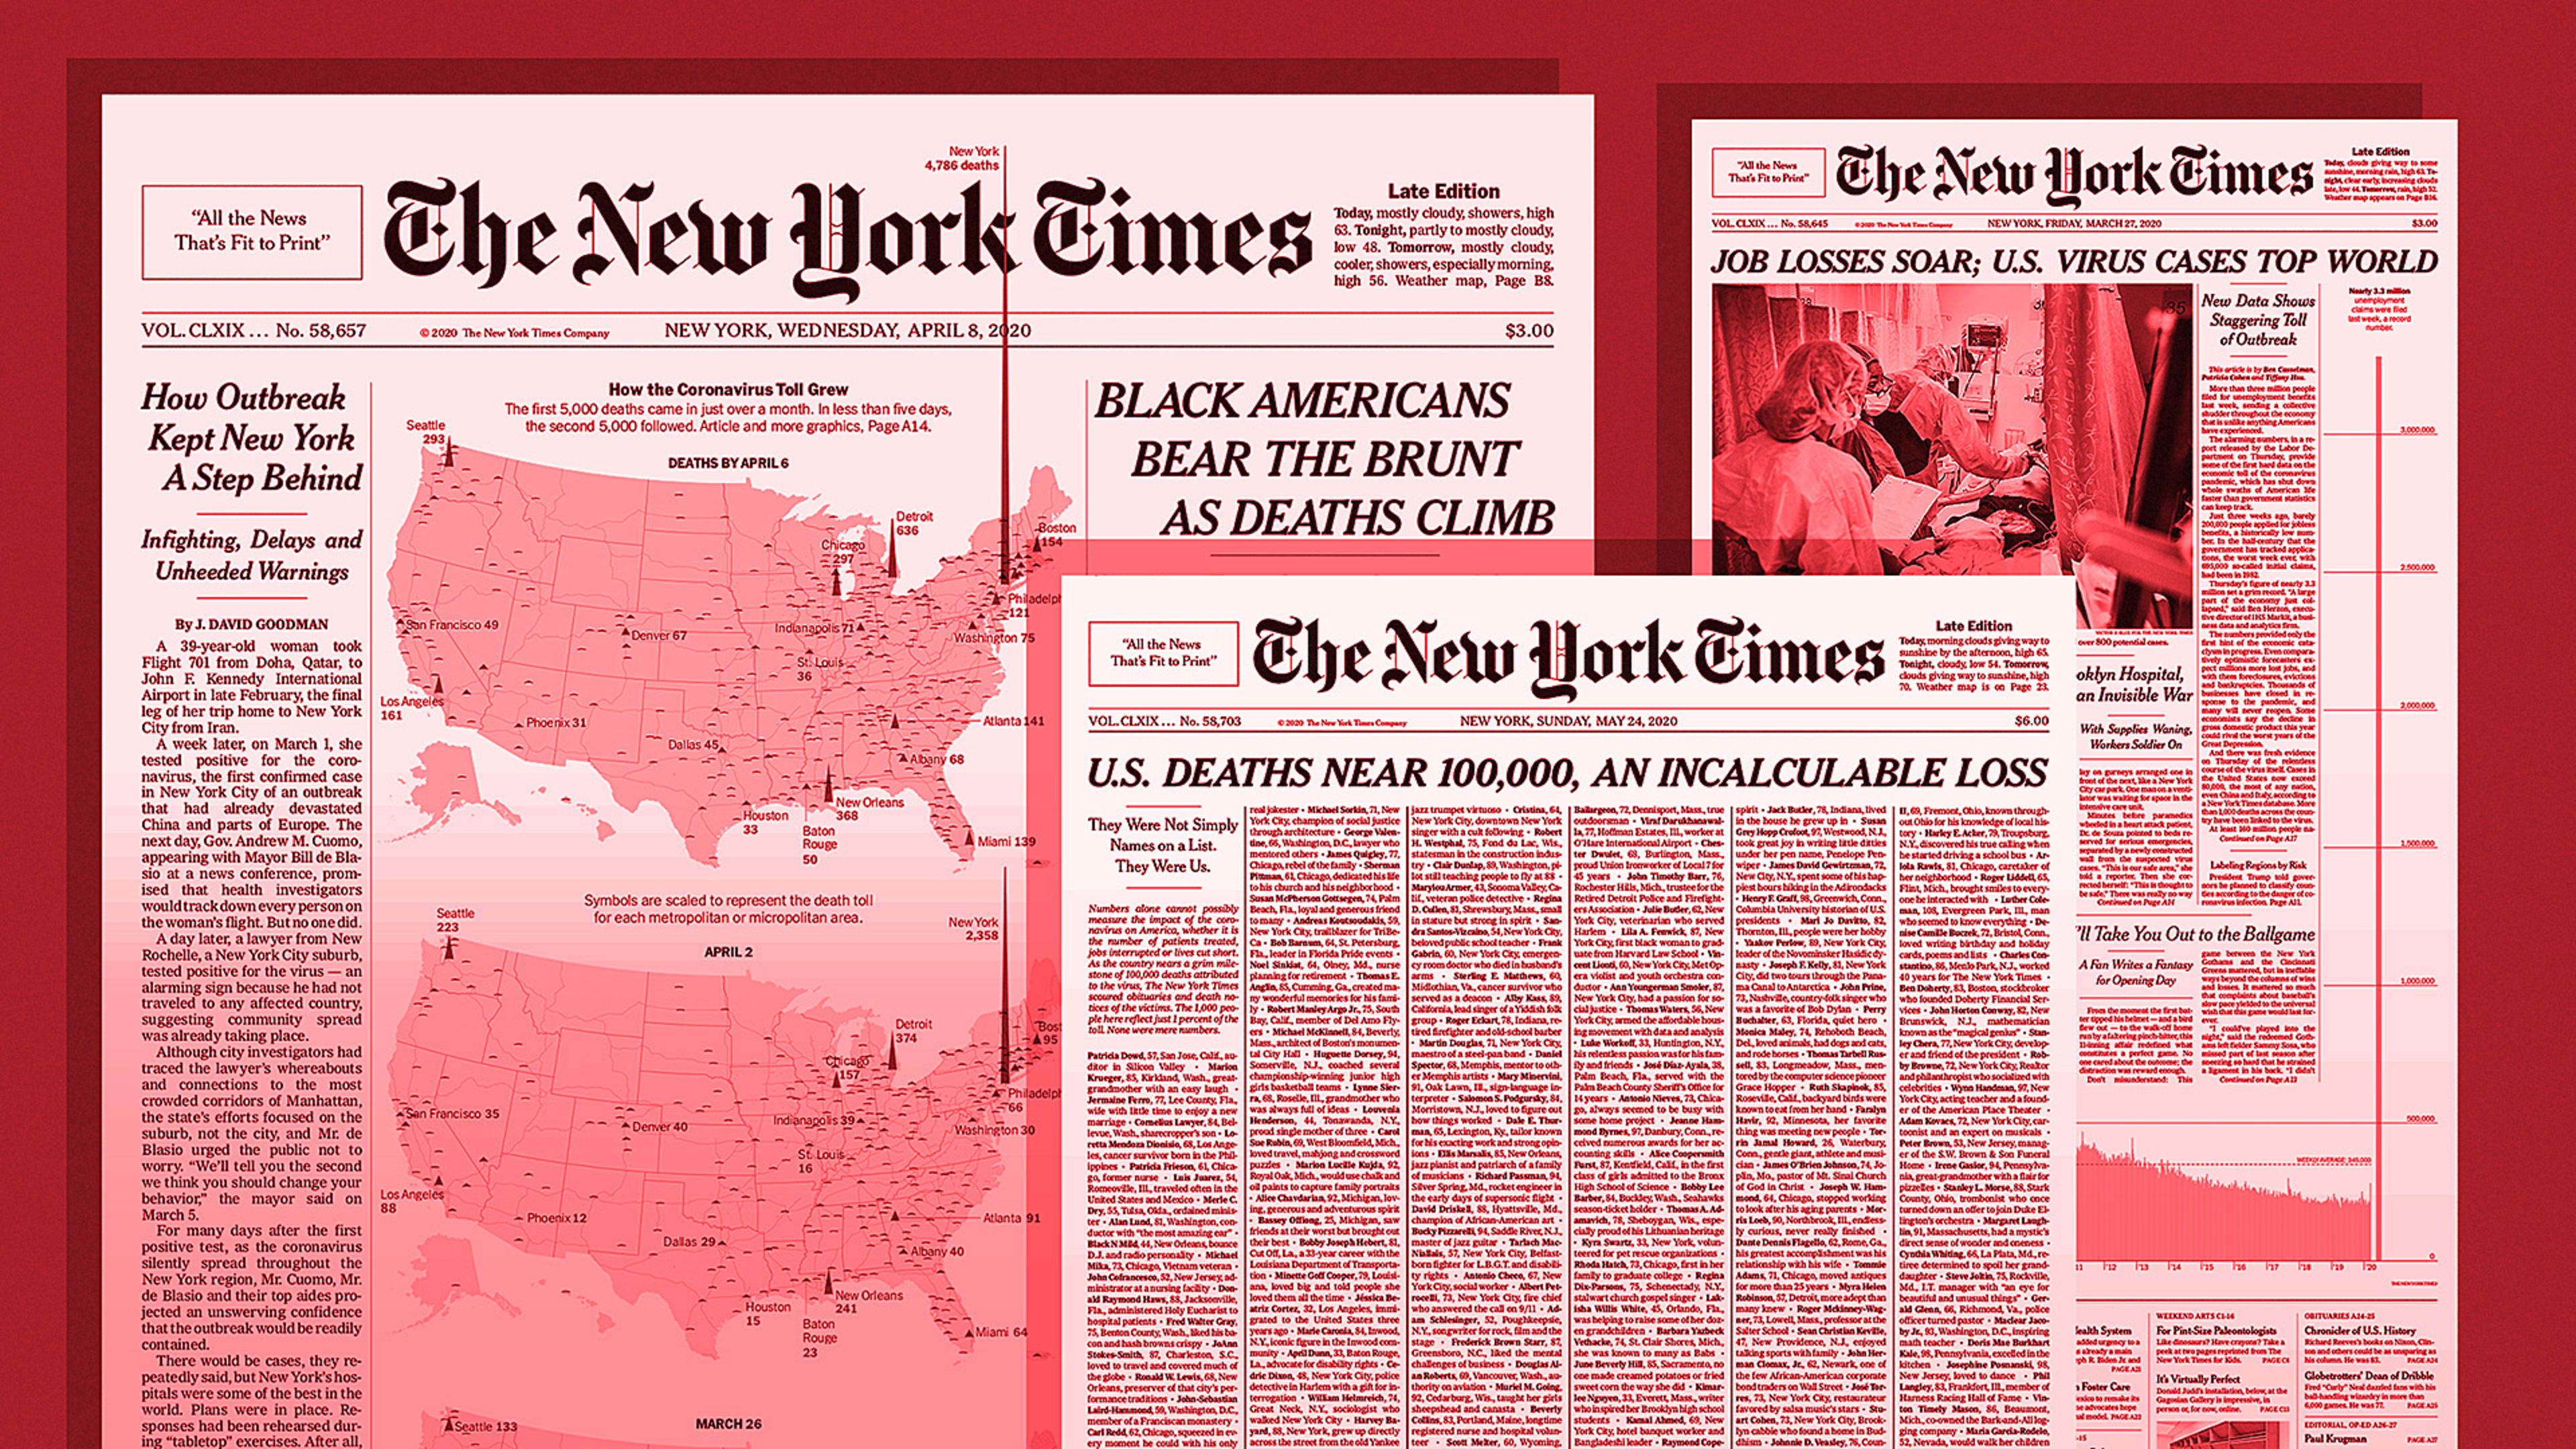 Why ‘The New York Times’ reinvented its front page to cover COVID-19